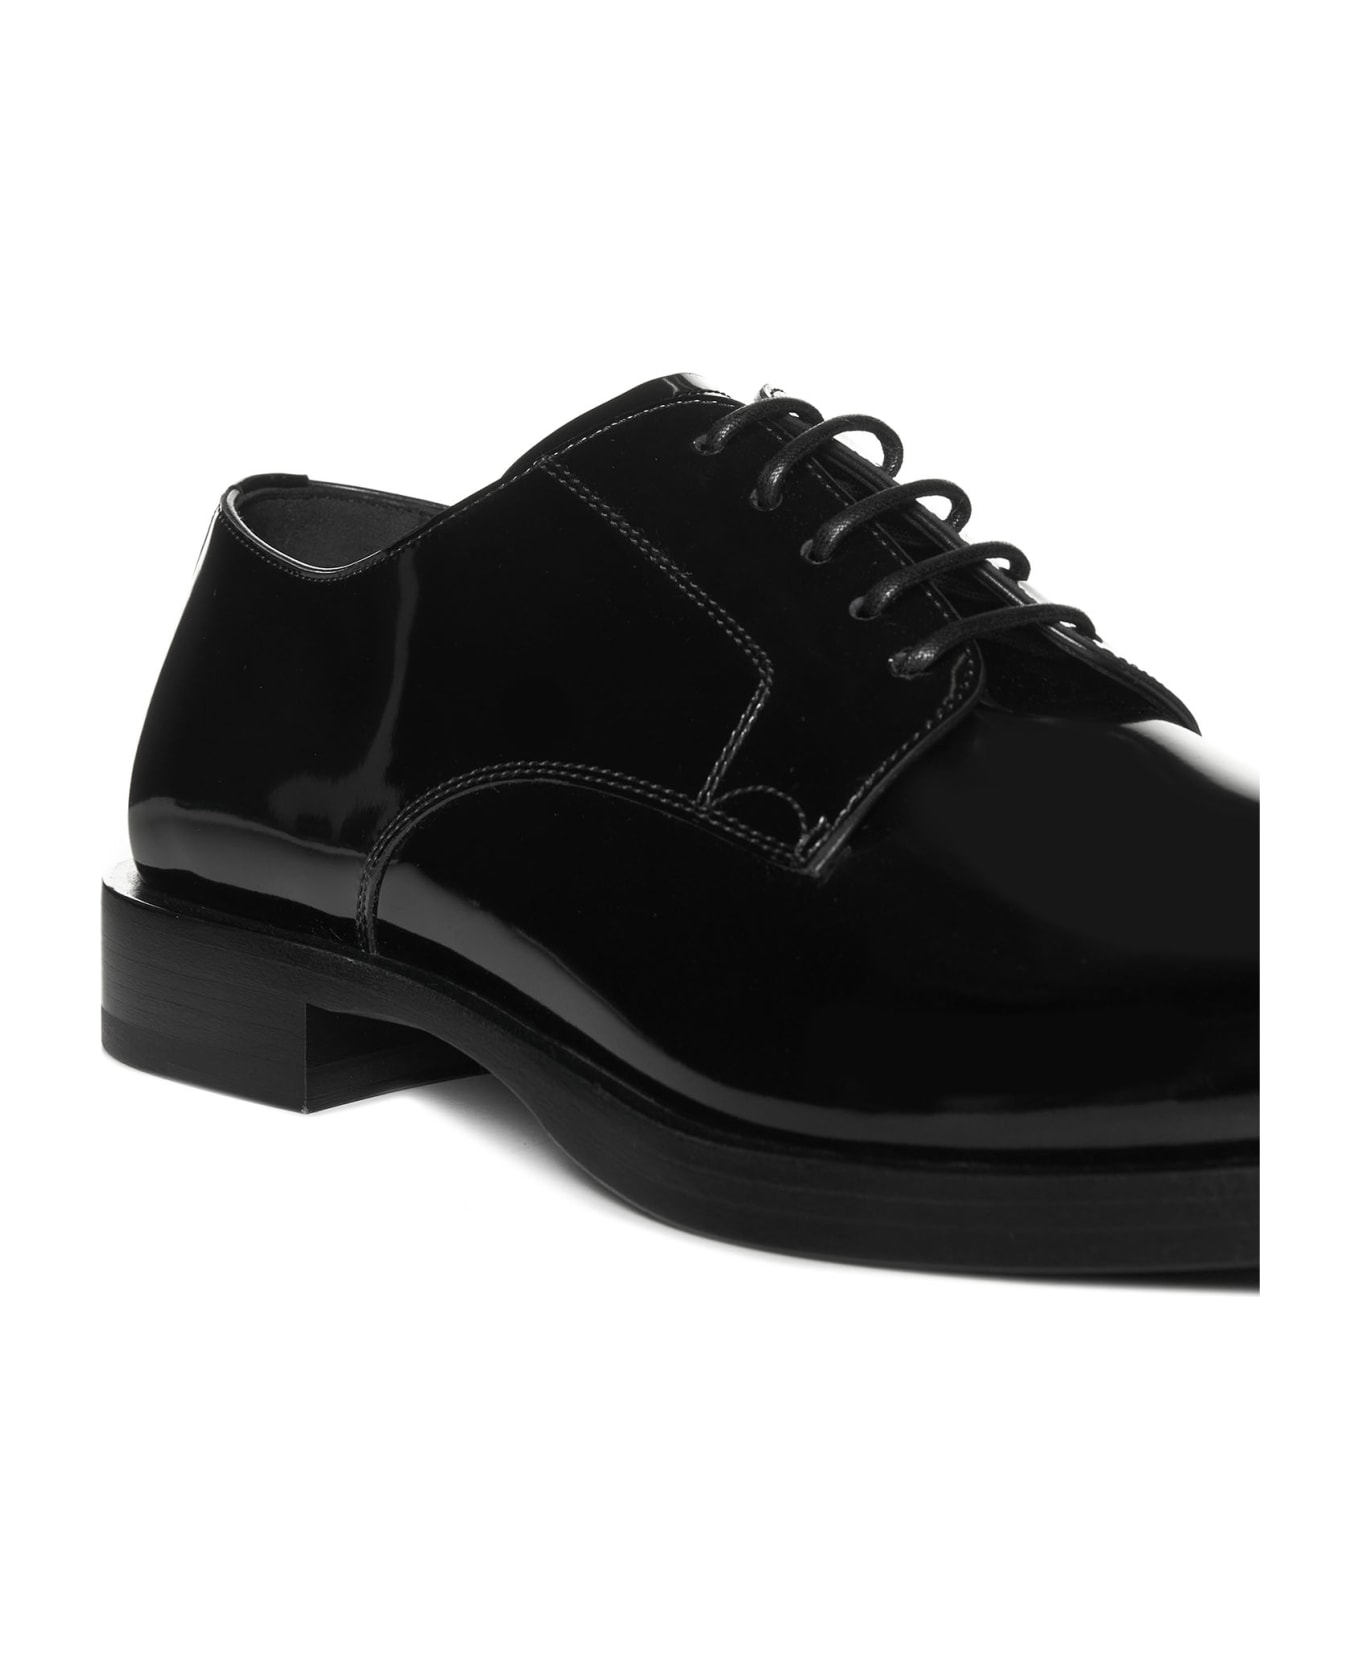 Dolce & Gabbana Classic Lace-up Derby Shoes - Nero